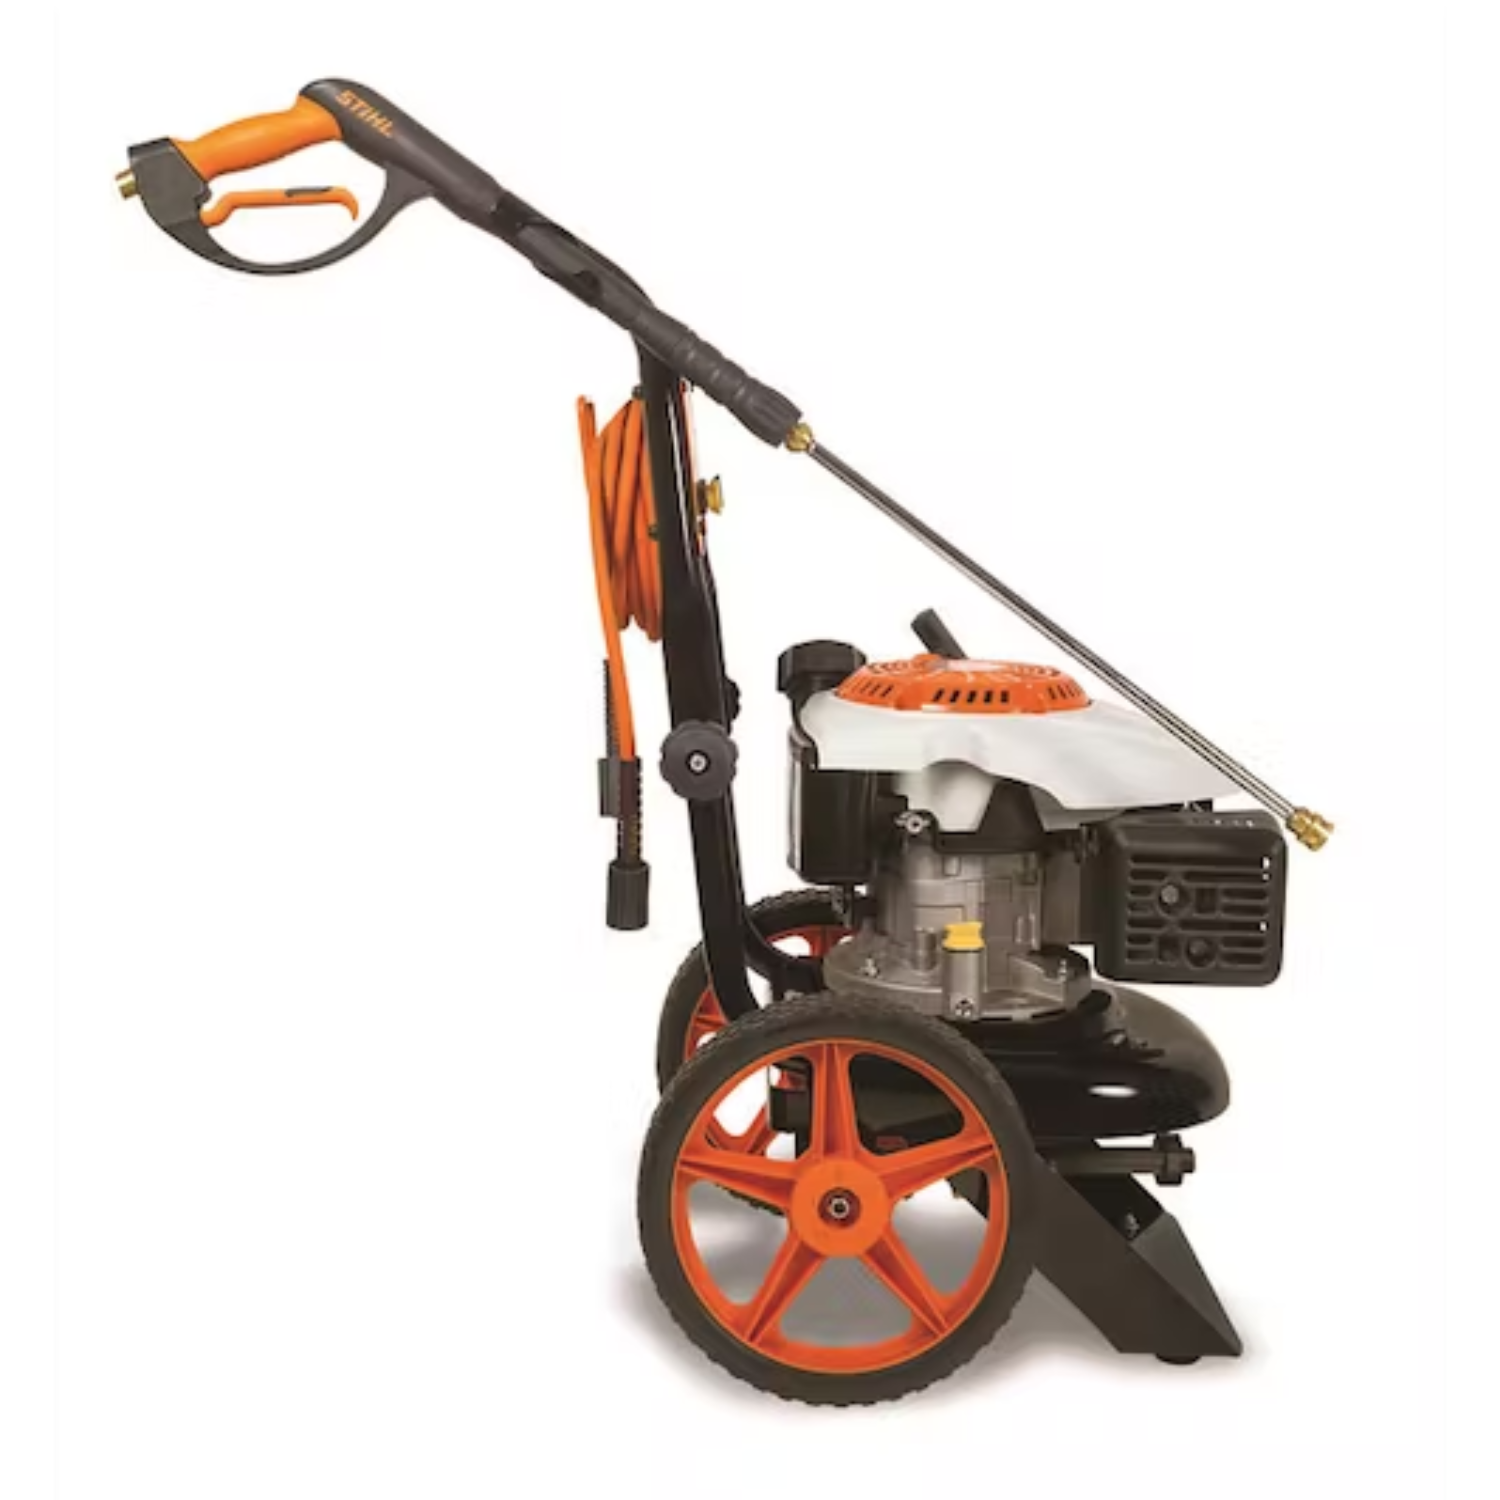 RB 800, High Pressure Washer for Professionals